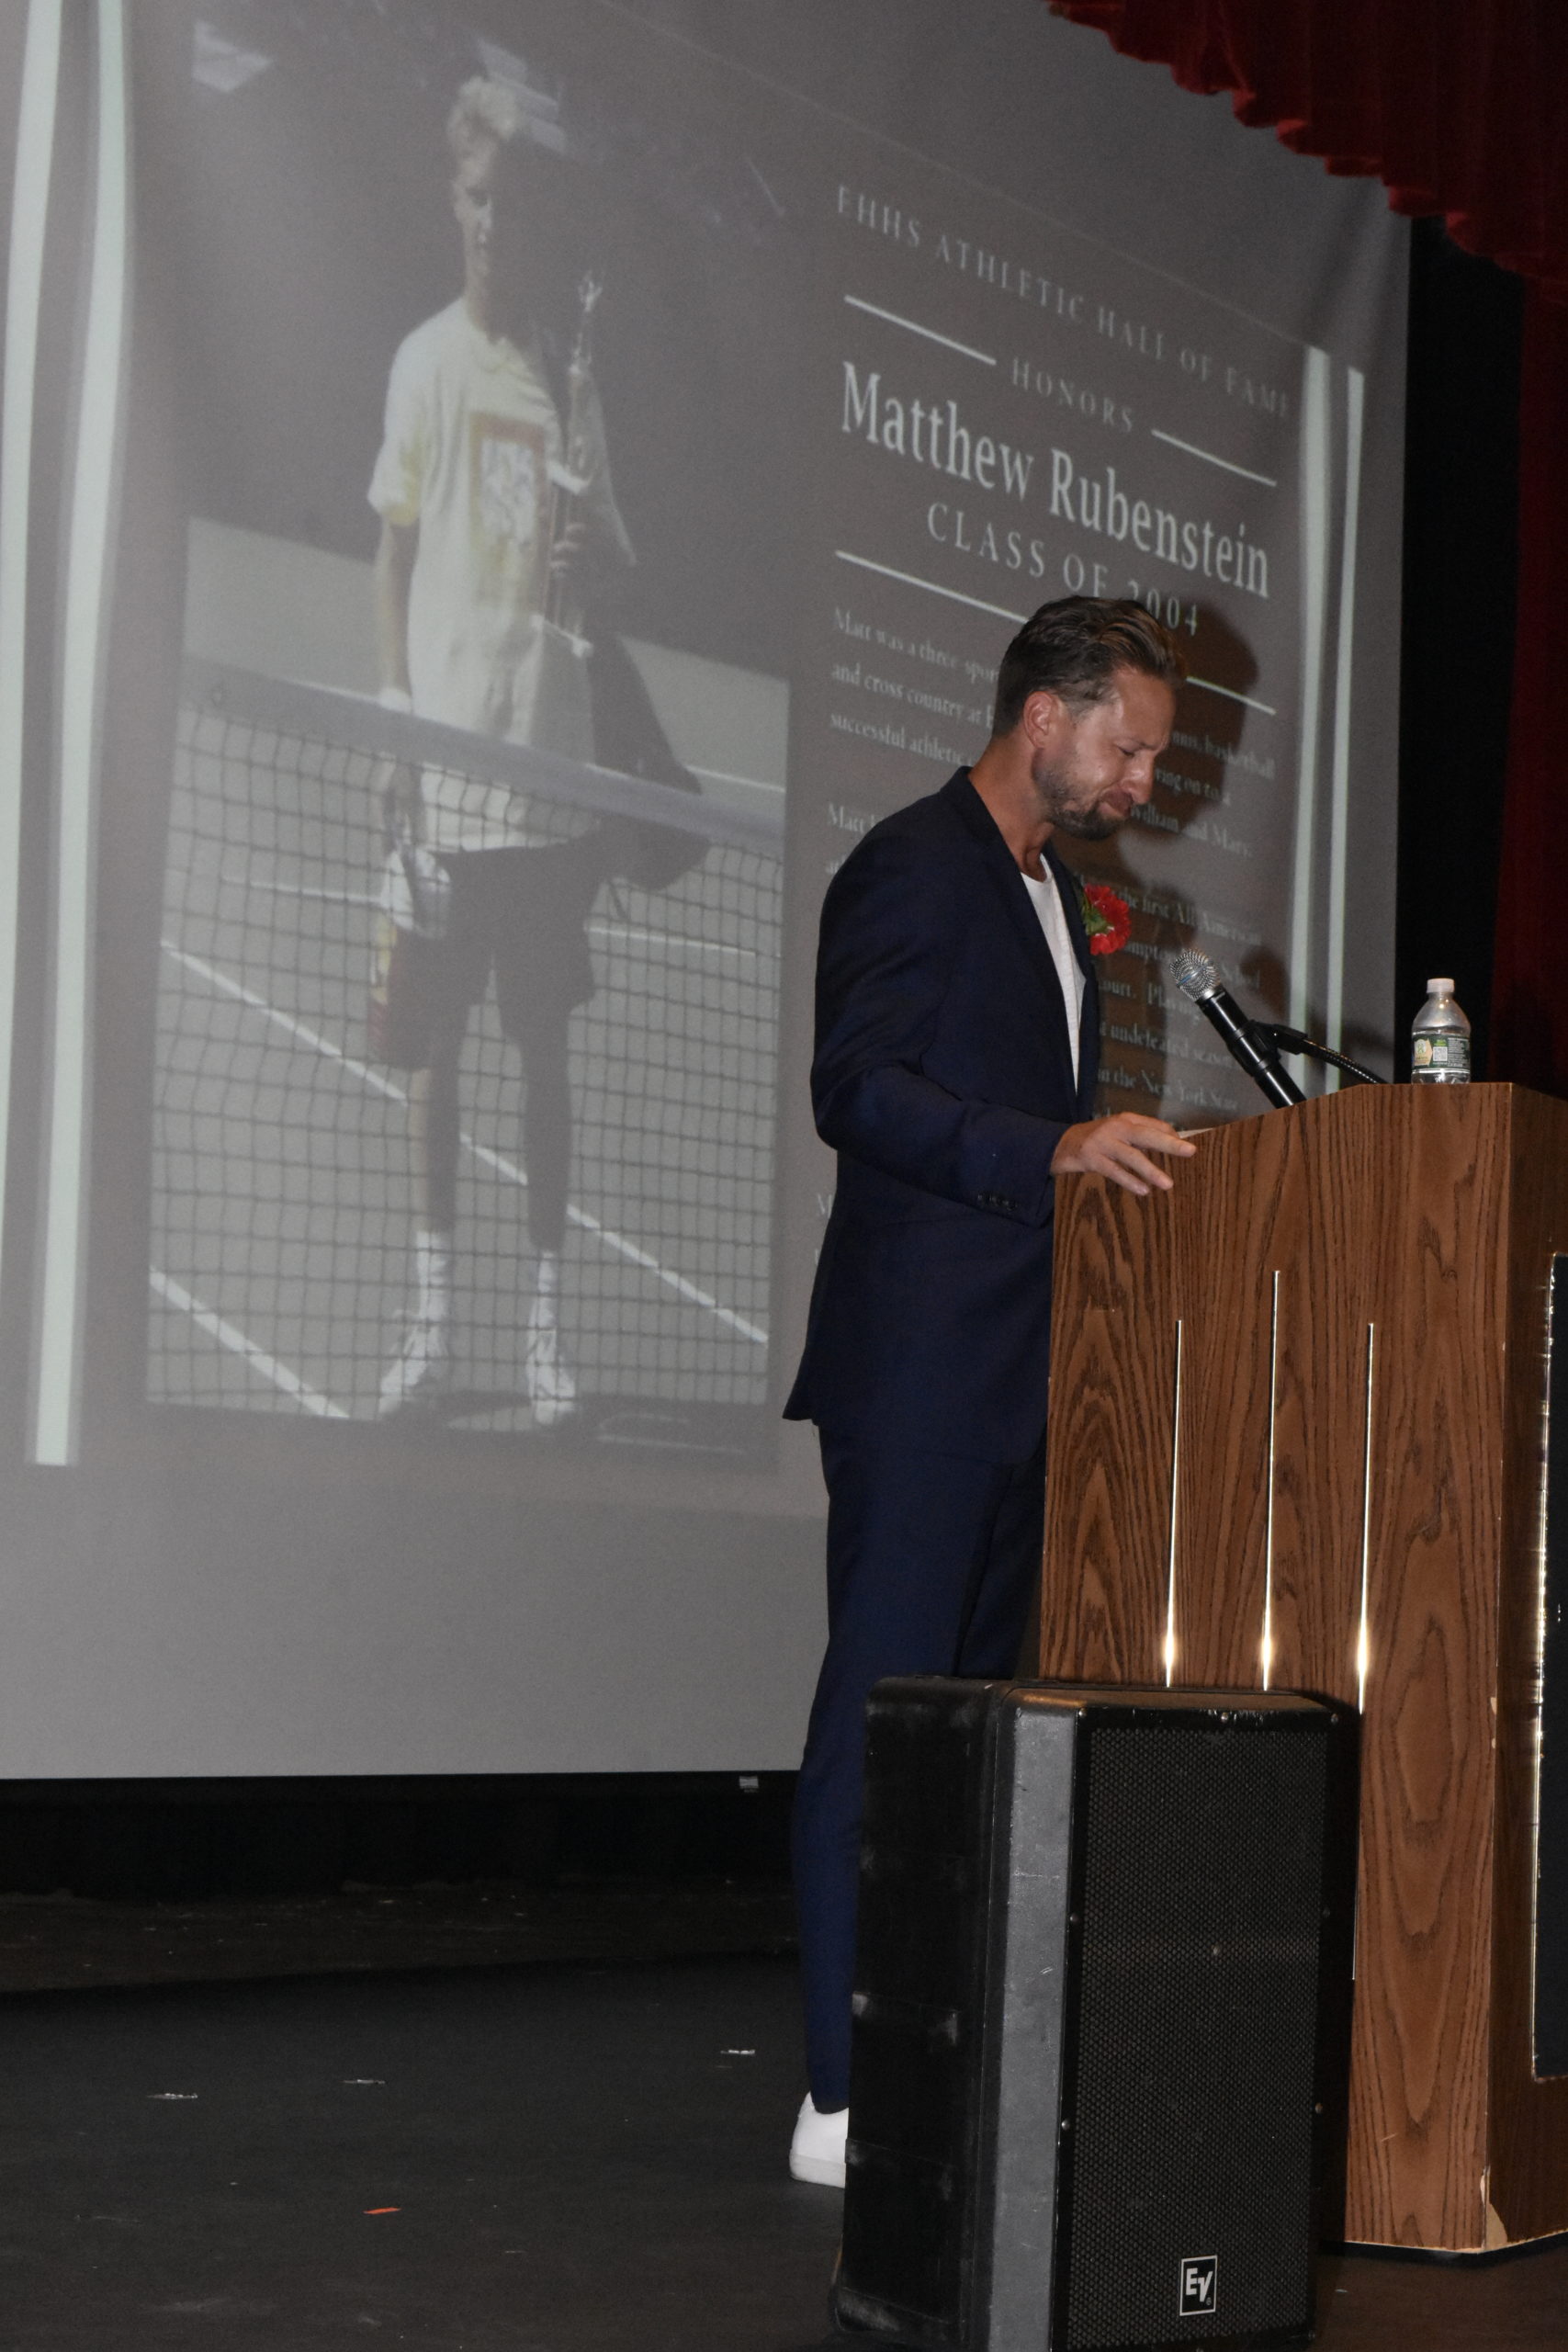 Matthew Rubenstein was inducted into East Hampton's Hall of Fame on Saturday morning.